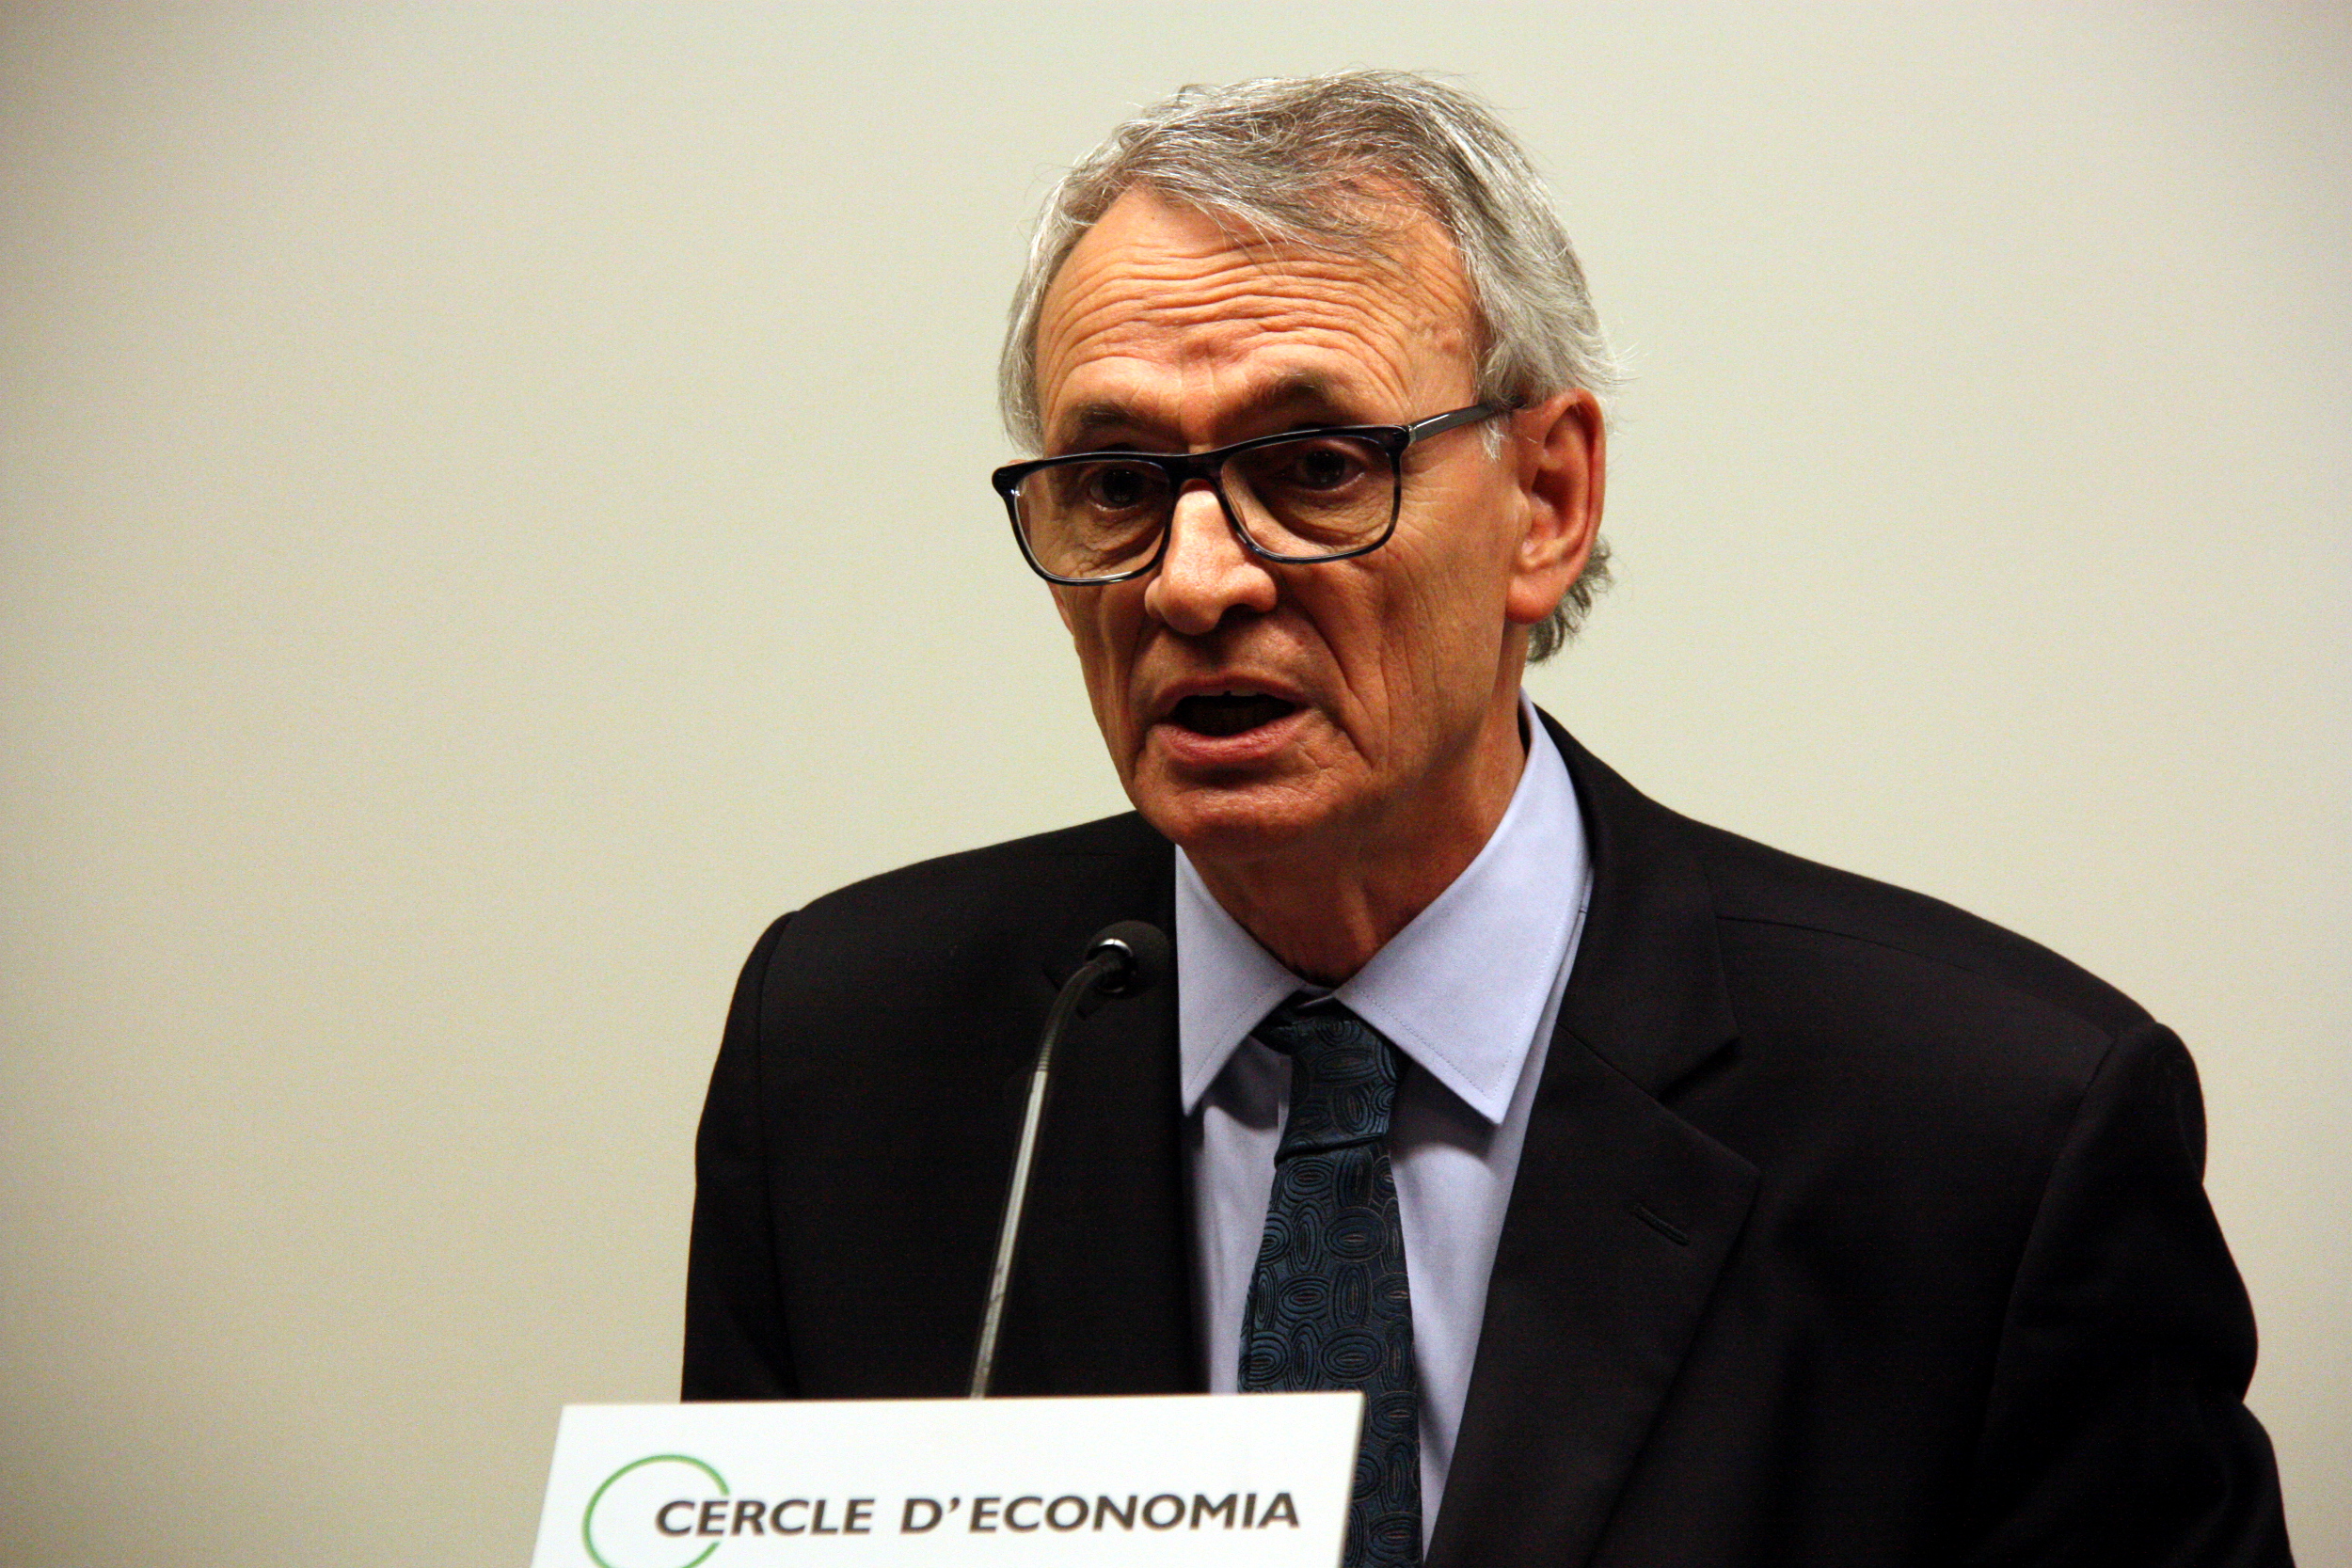 The Cercle d'Economia's president, Anton Costas warned of the negative consequences that Catalonia's independence would have on the economy (by ACN)